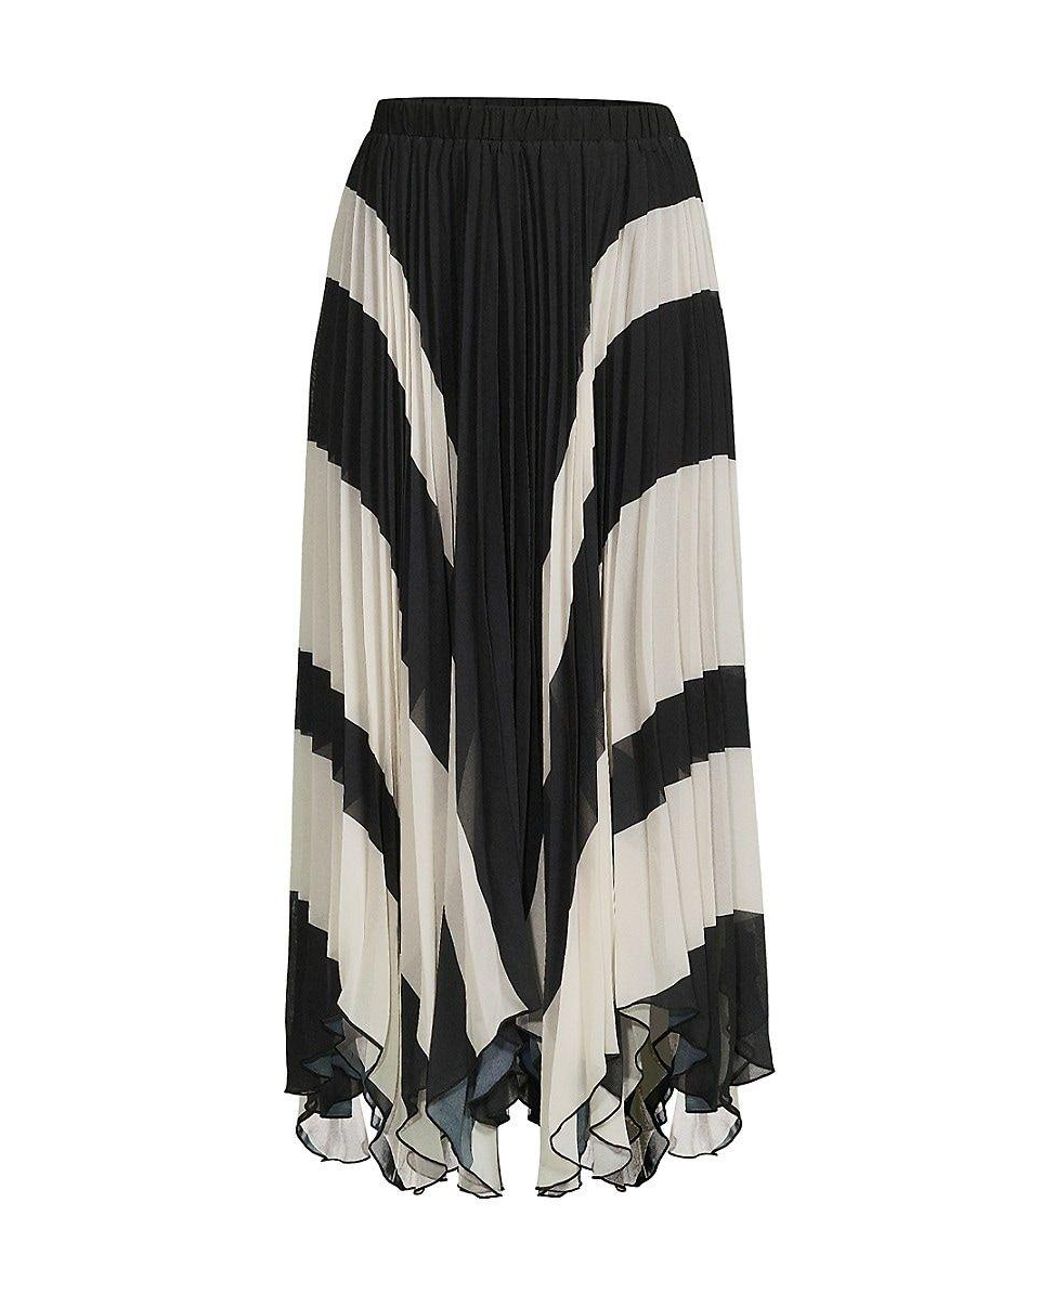 Wdny Colorblock Pleated Maxi Skirt in Black | Lyst